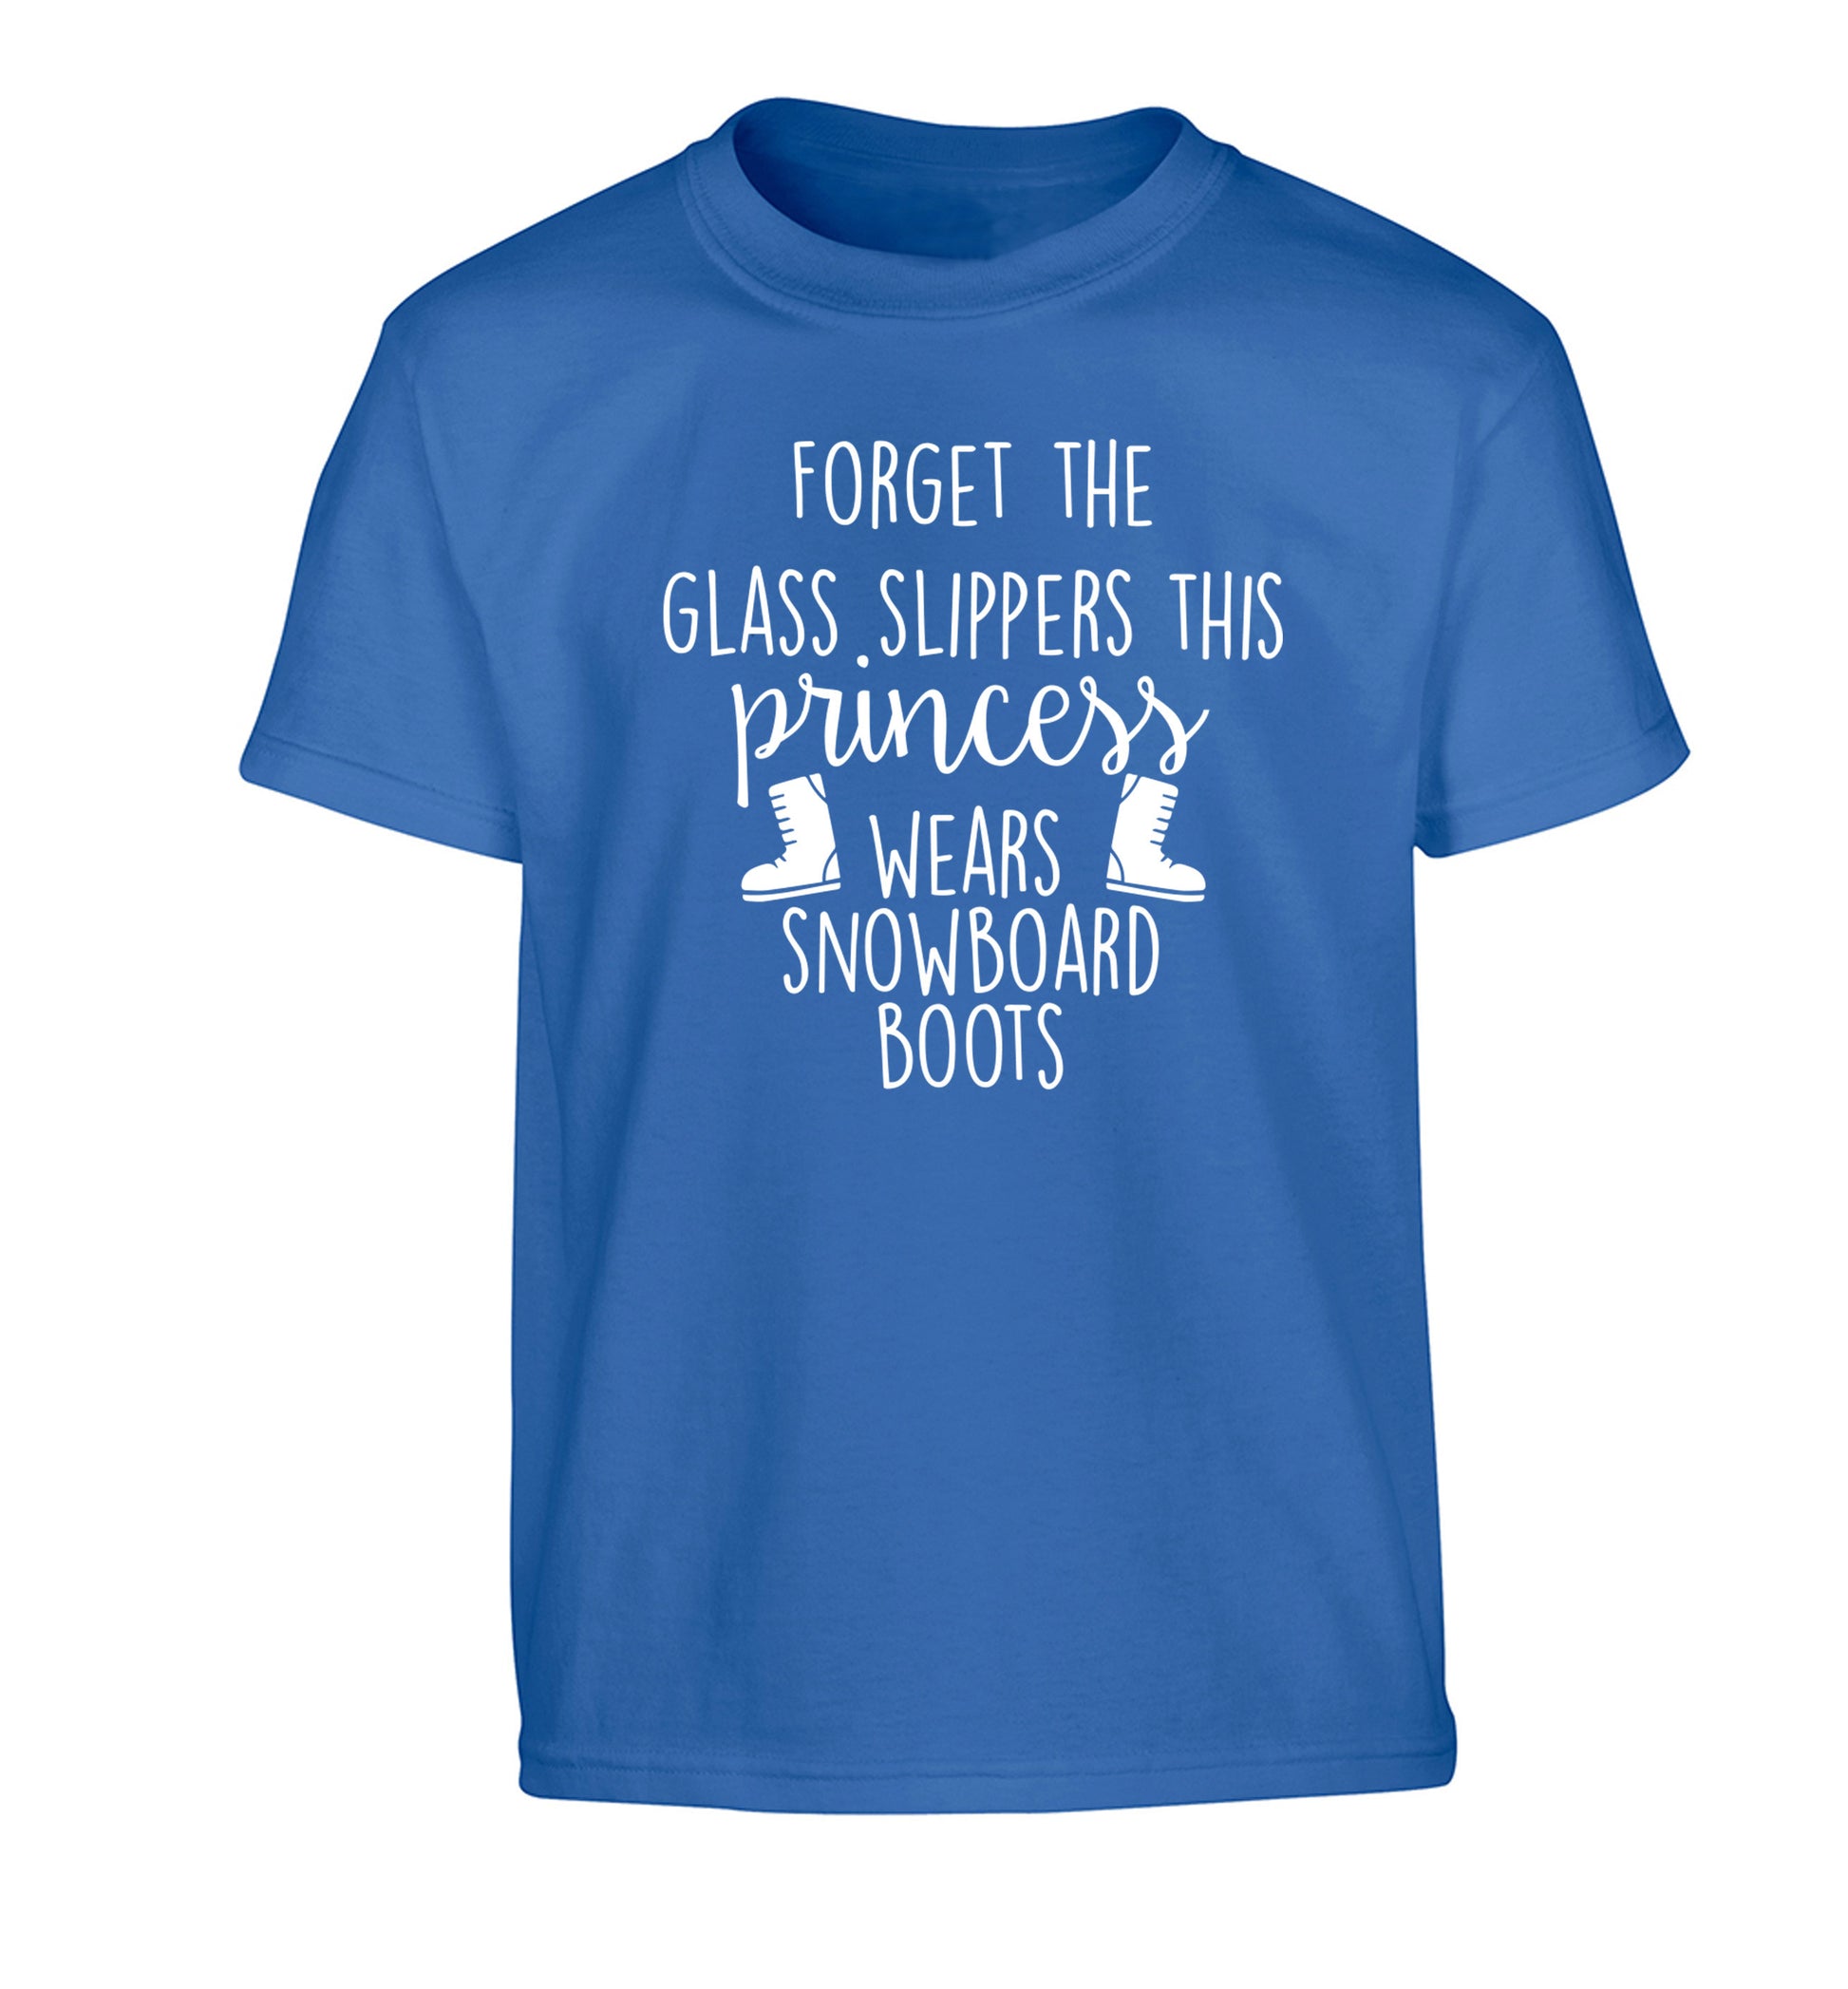 Forget the glass slippers this princess wears snowboard boots Children's blue Tshirt 12-14 Years